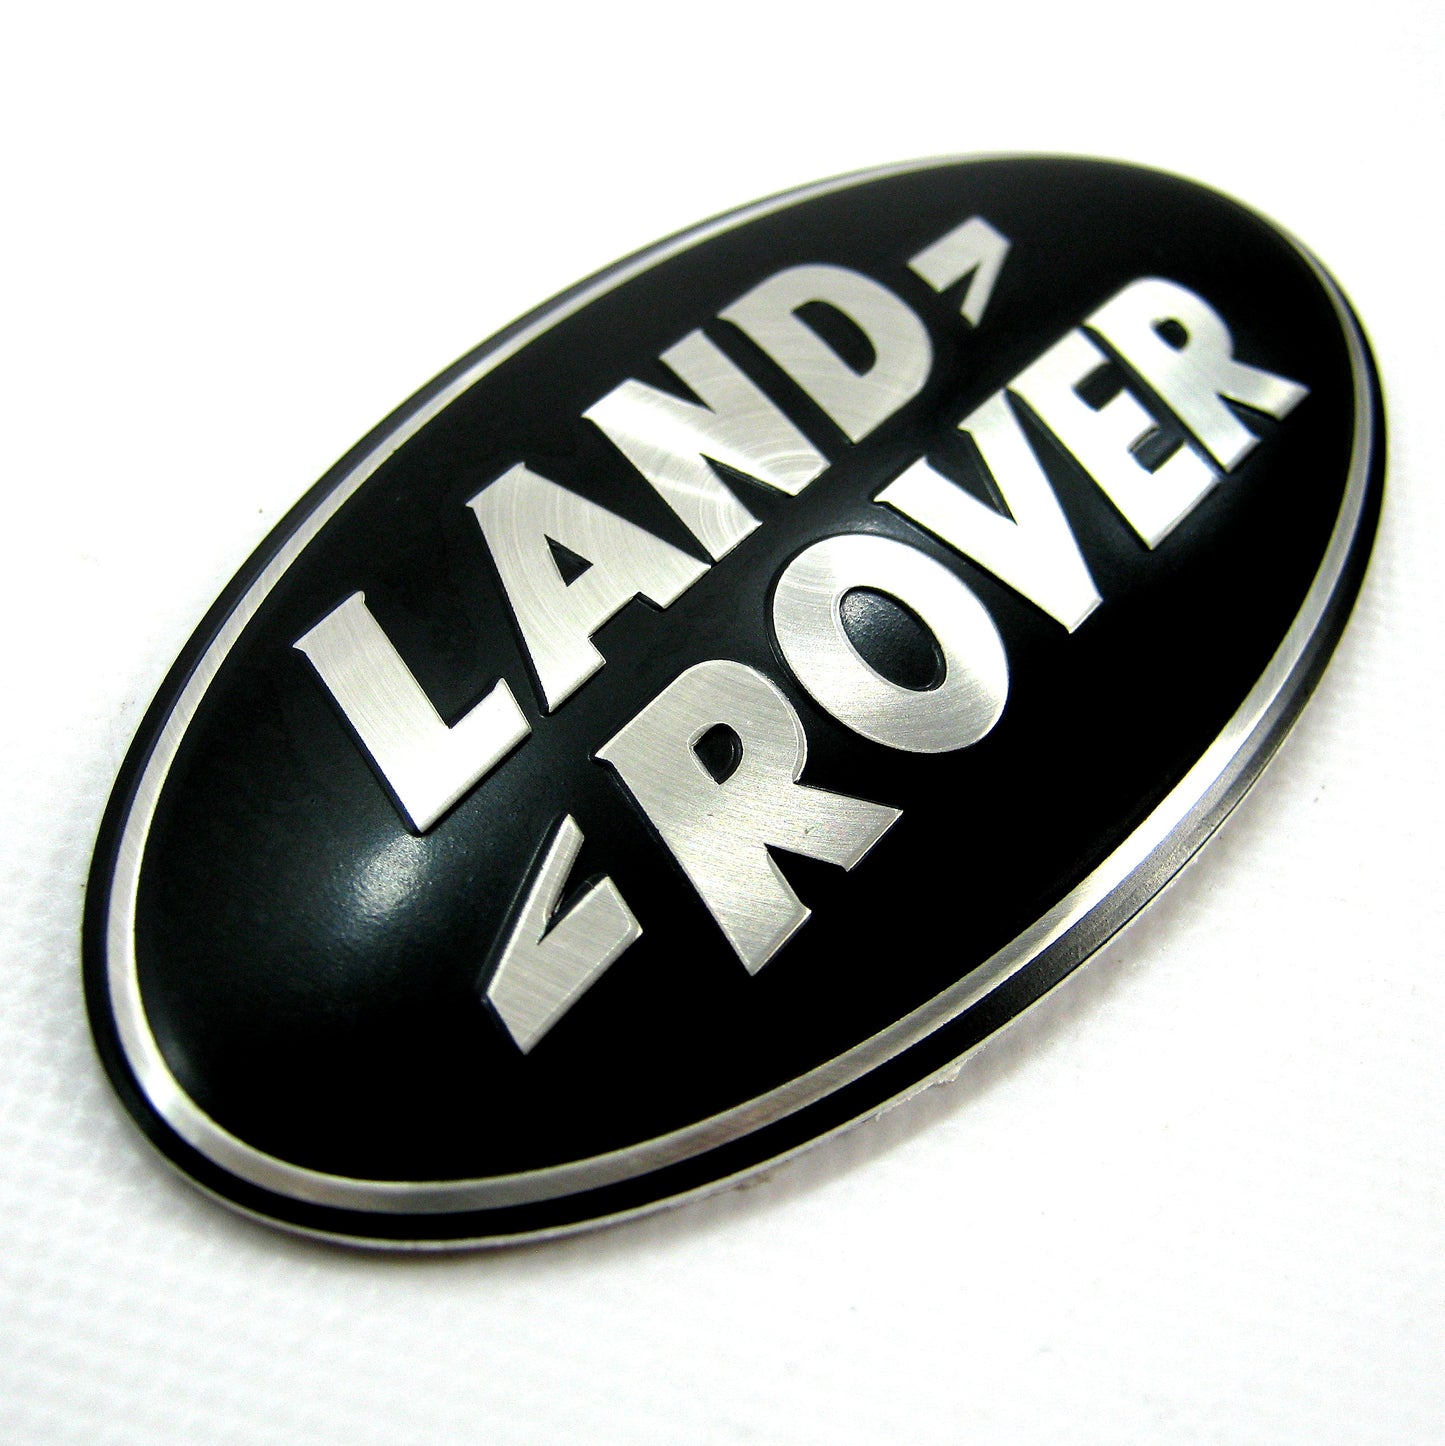 Genuine Front Grille Badge - Black & Silver - for Land Rover Discovery 3 (LR3G509 / LR3G061)